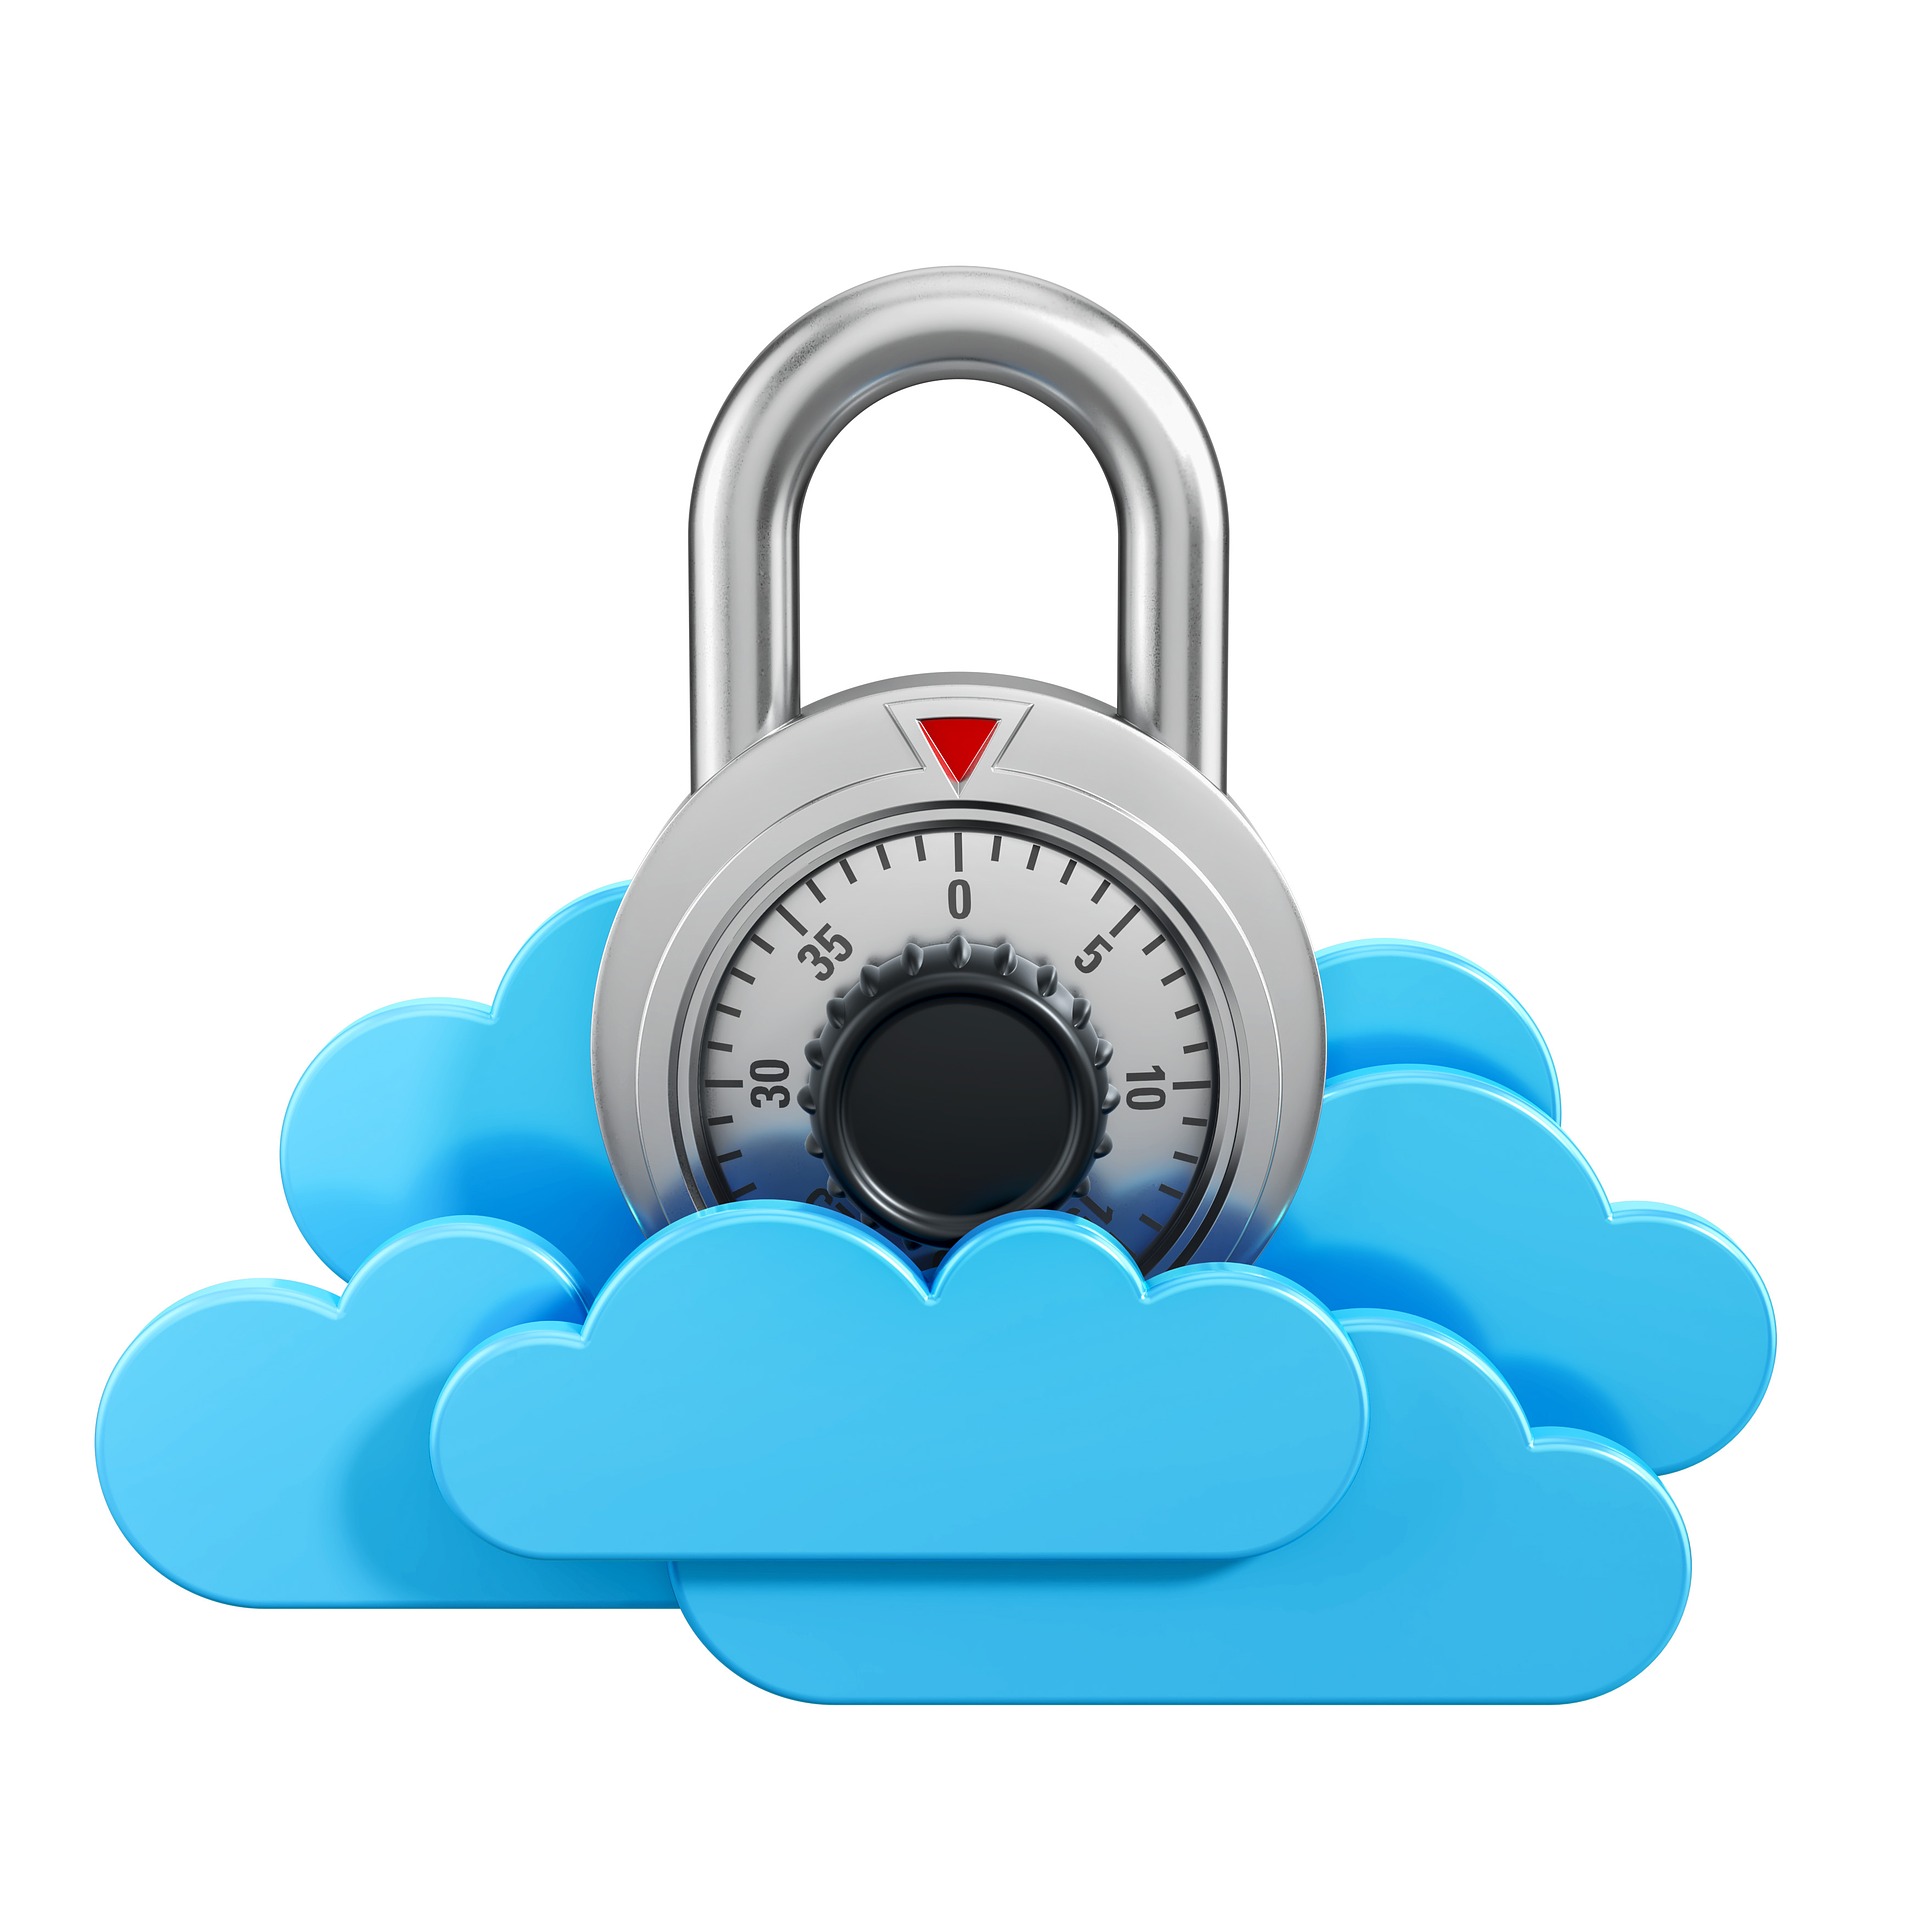 A combination lock on a cloud